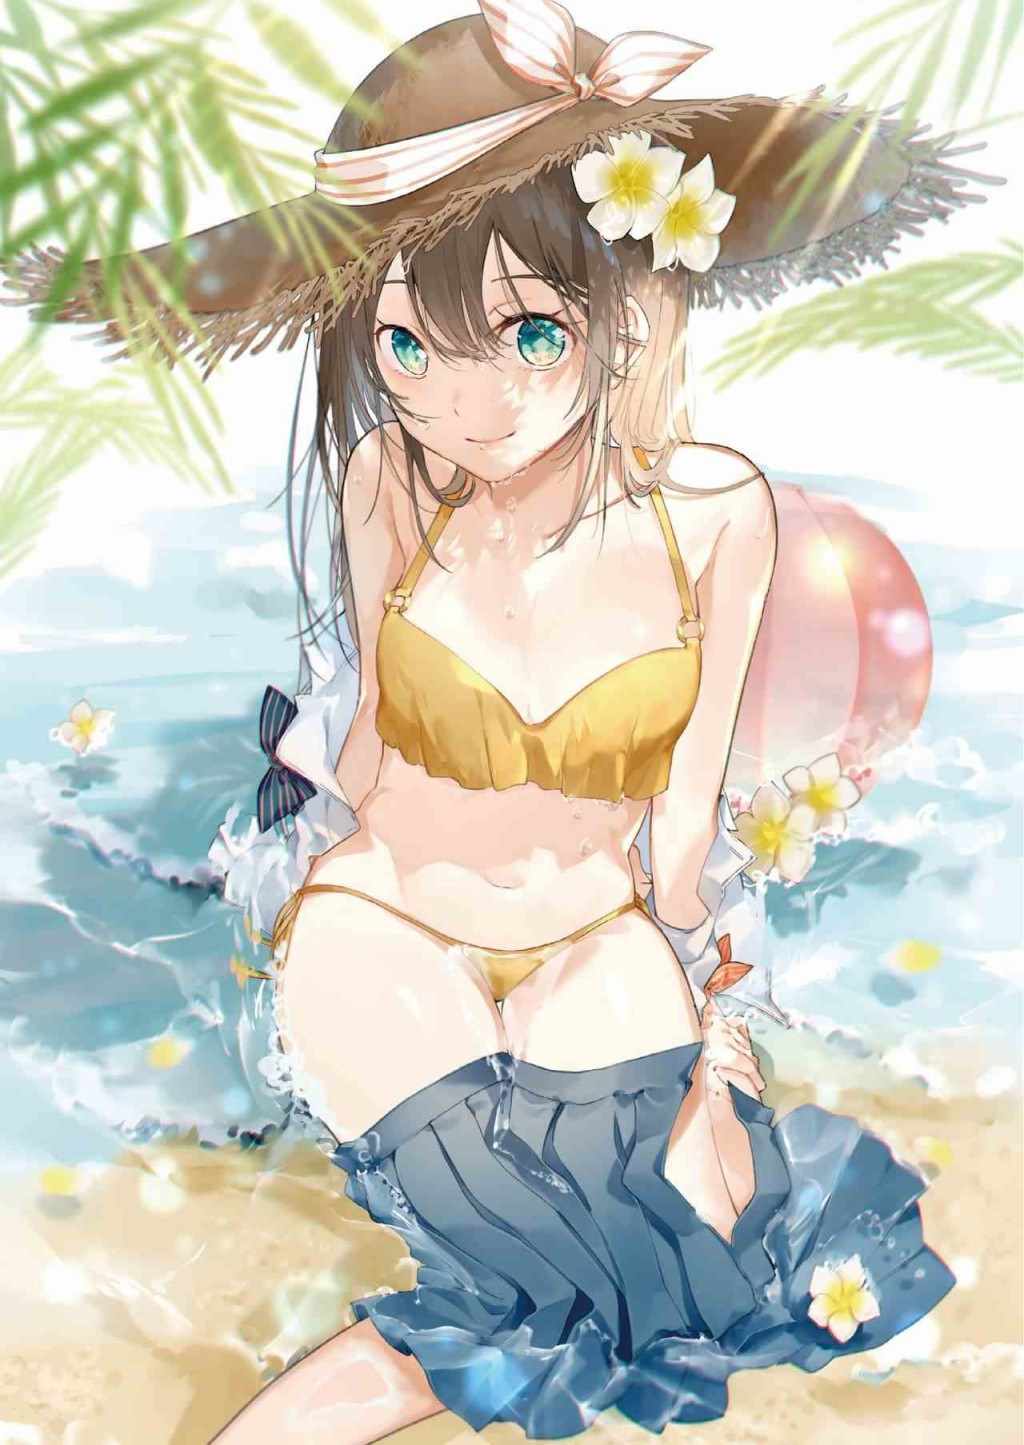 《How to draw swimsuits》漫画 短篇